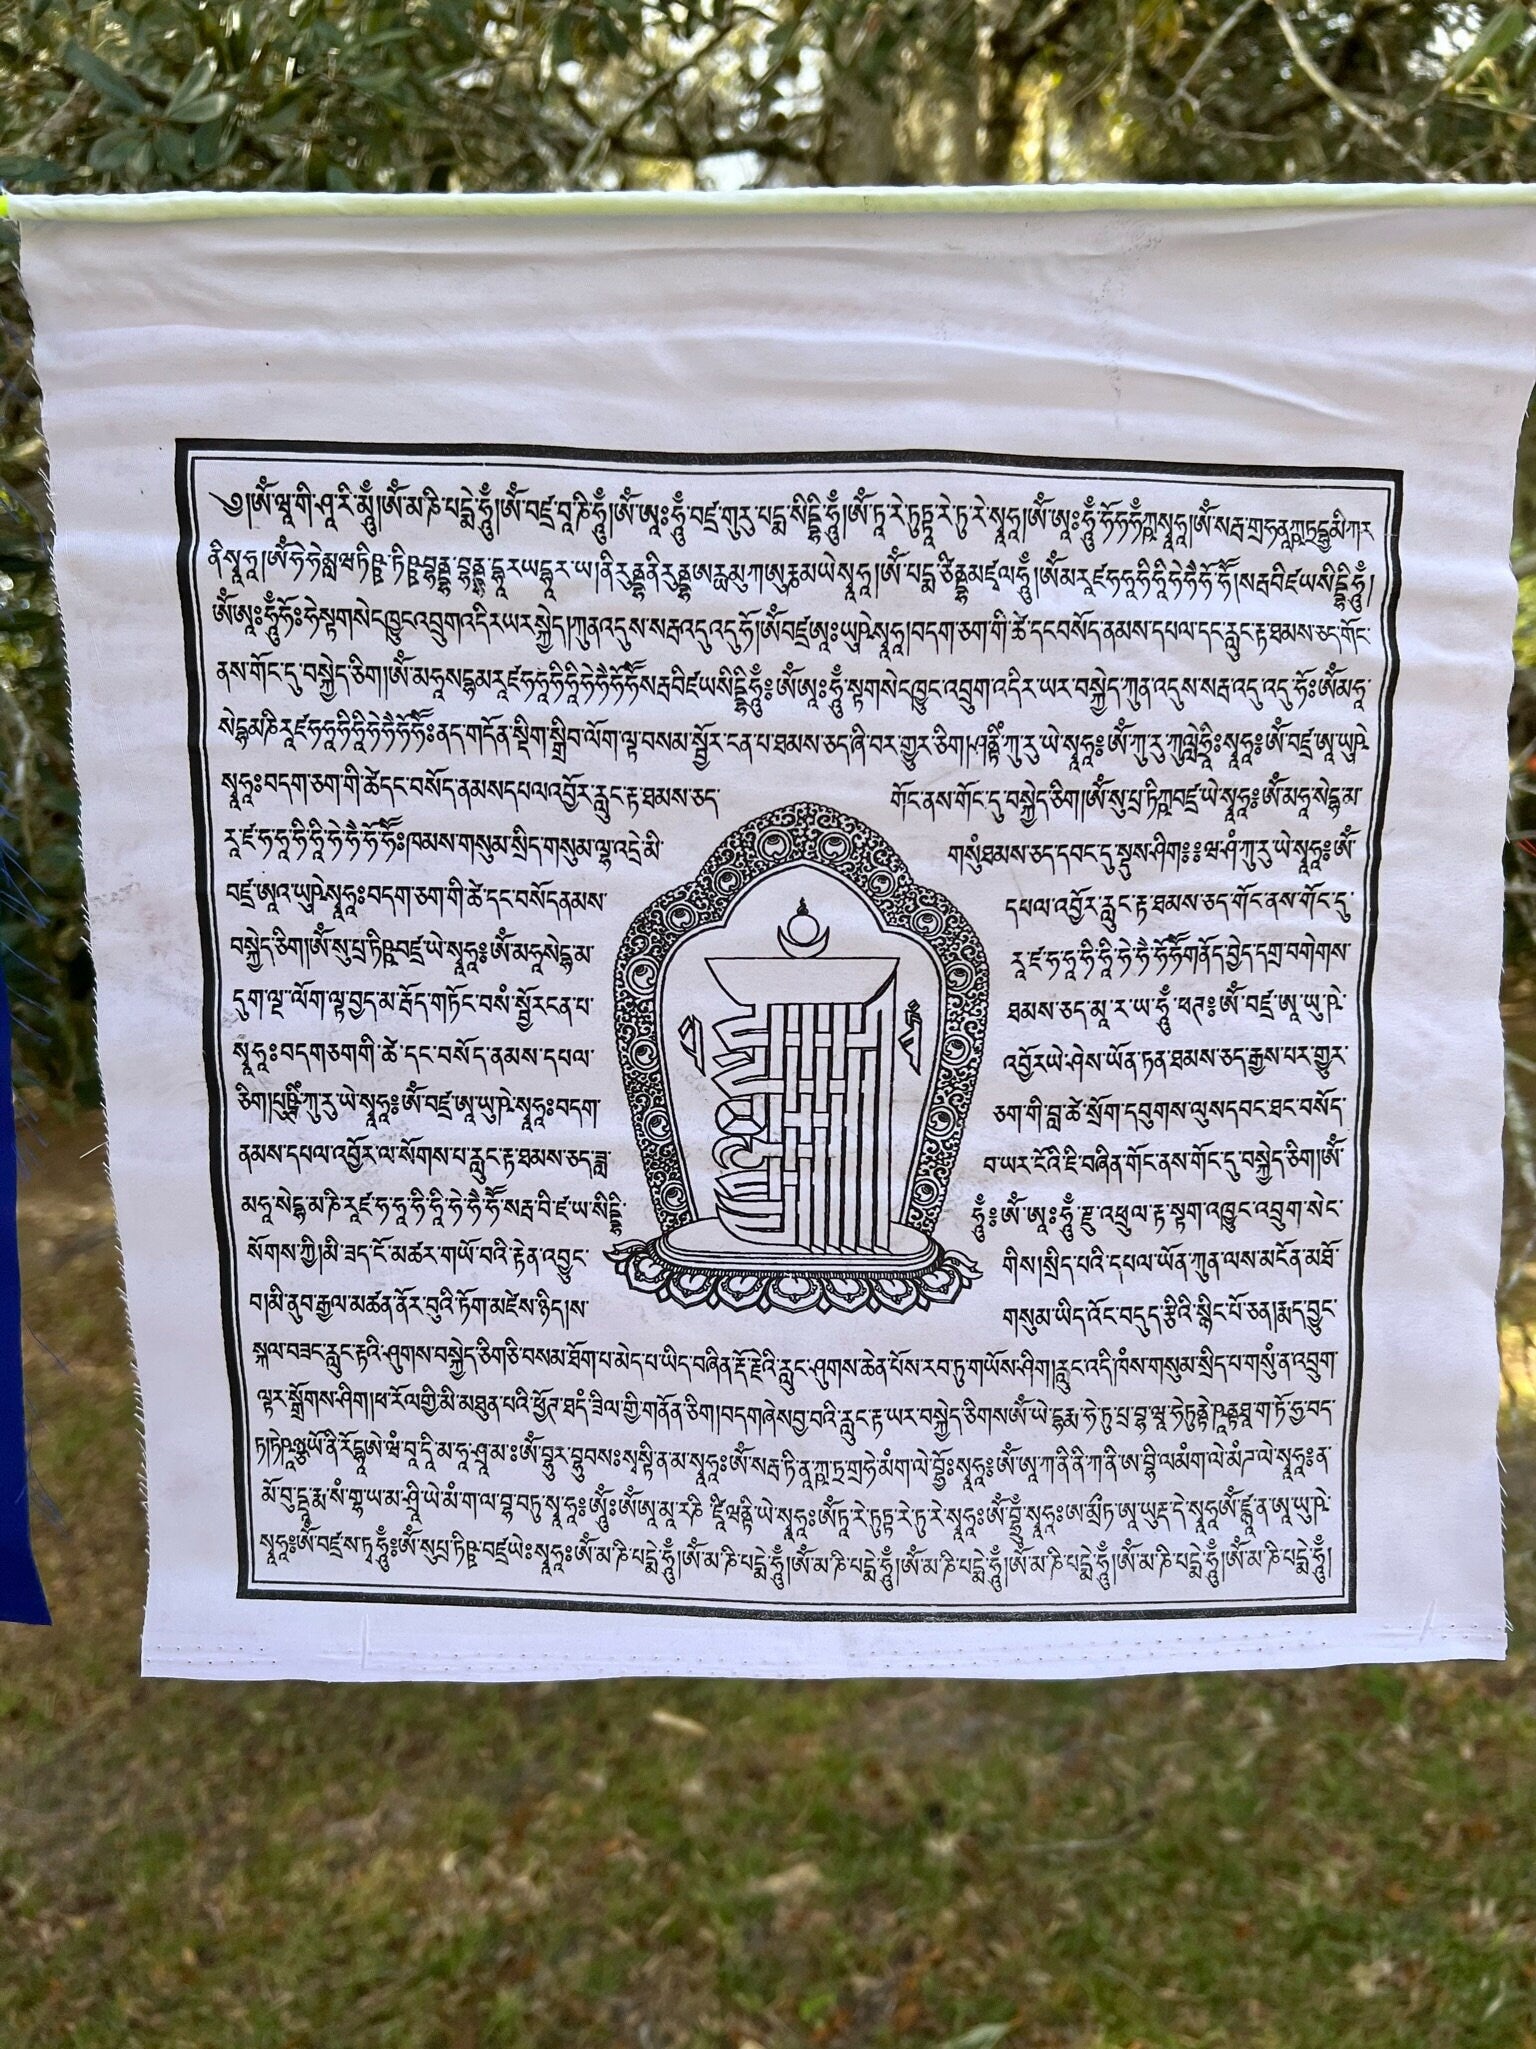 Shimmering white Kalachakra prayer flag, 13&quot;x13&quot; from a 25-flag strand. 5 colors, imprinted with prayers & 10-fold seed syllable.